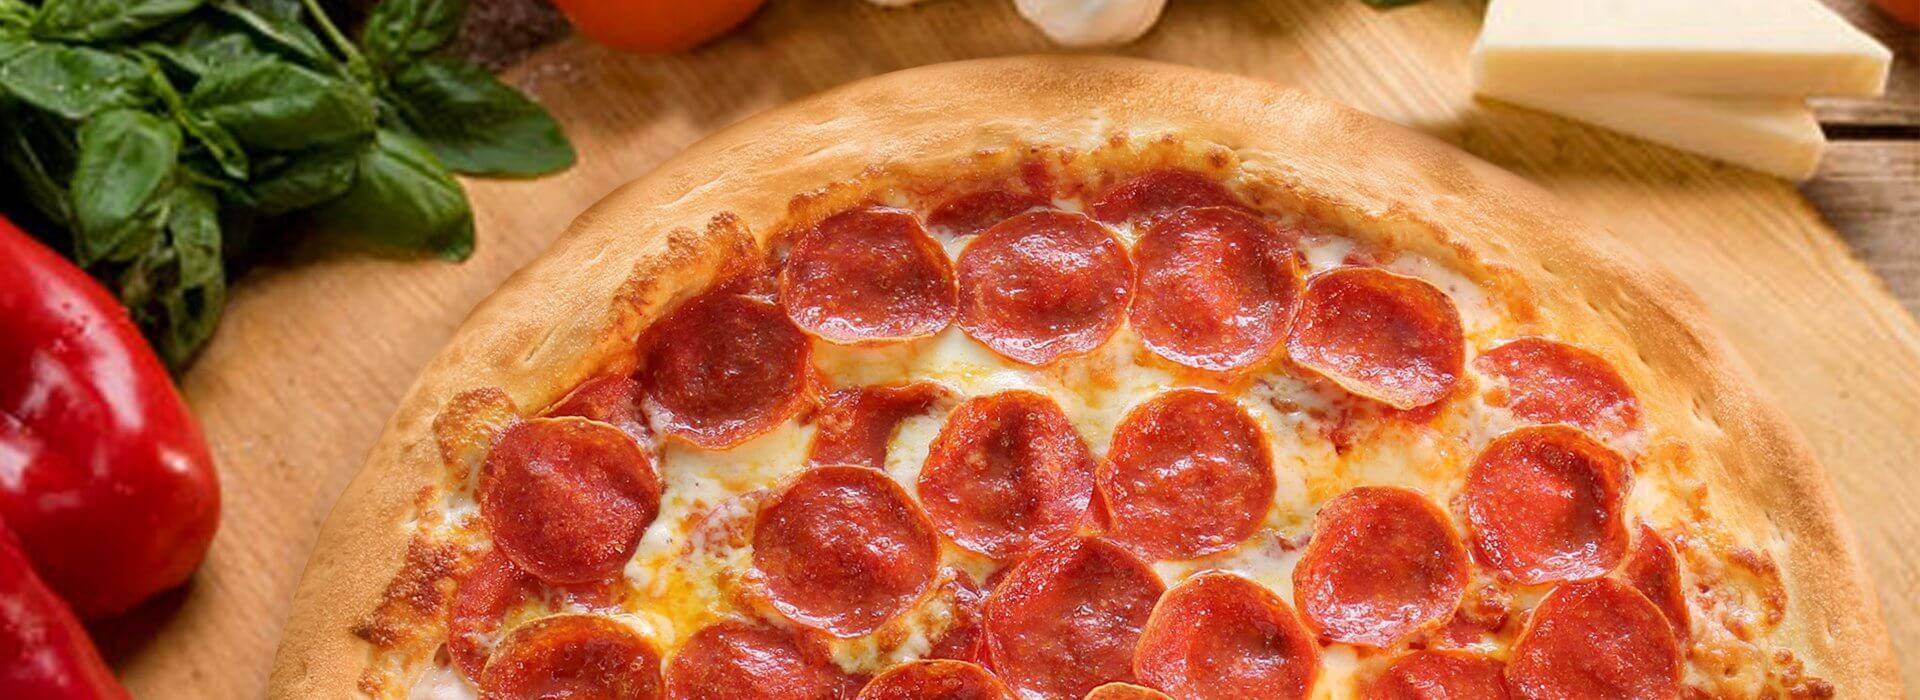 hero pepperoni pizza in des moines and kansas city missouri